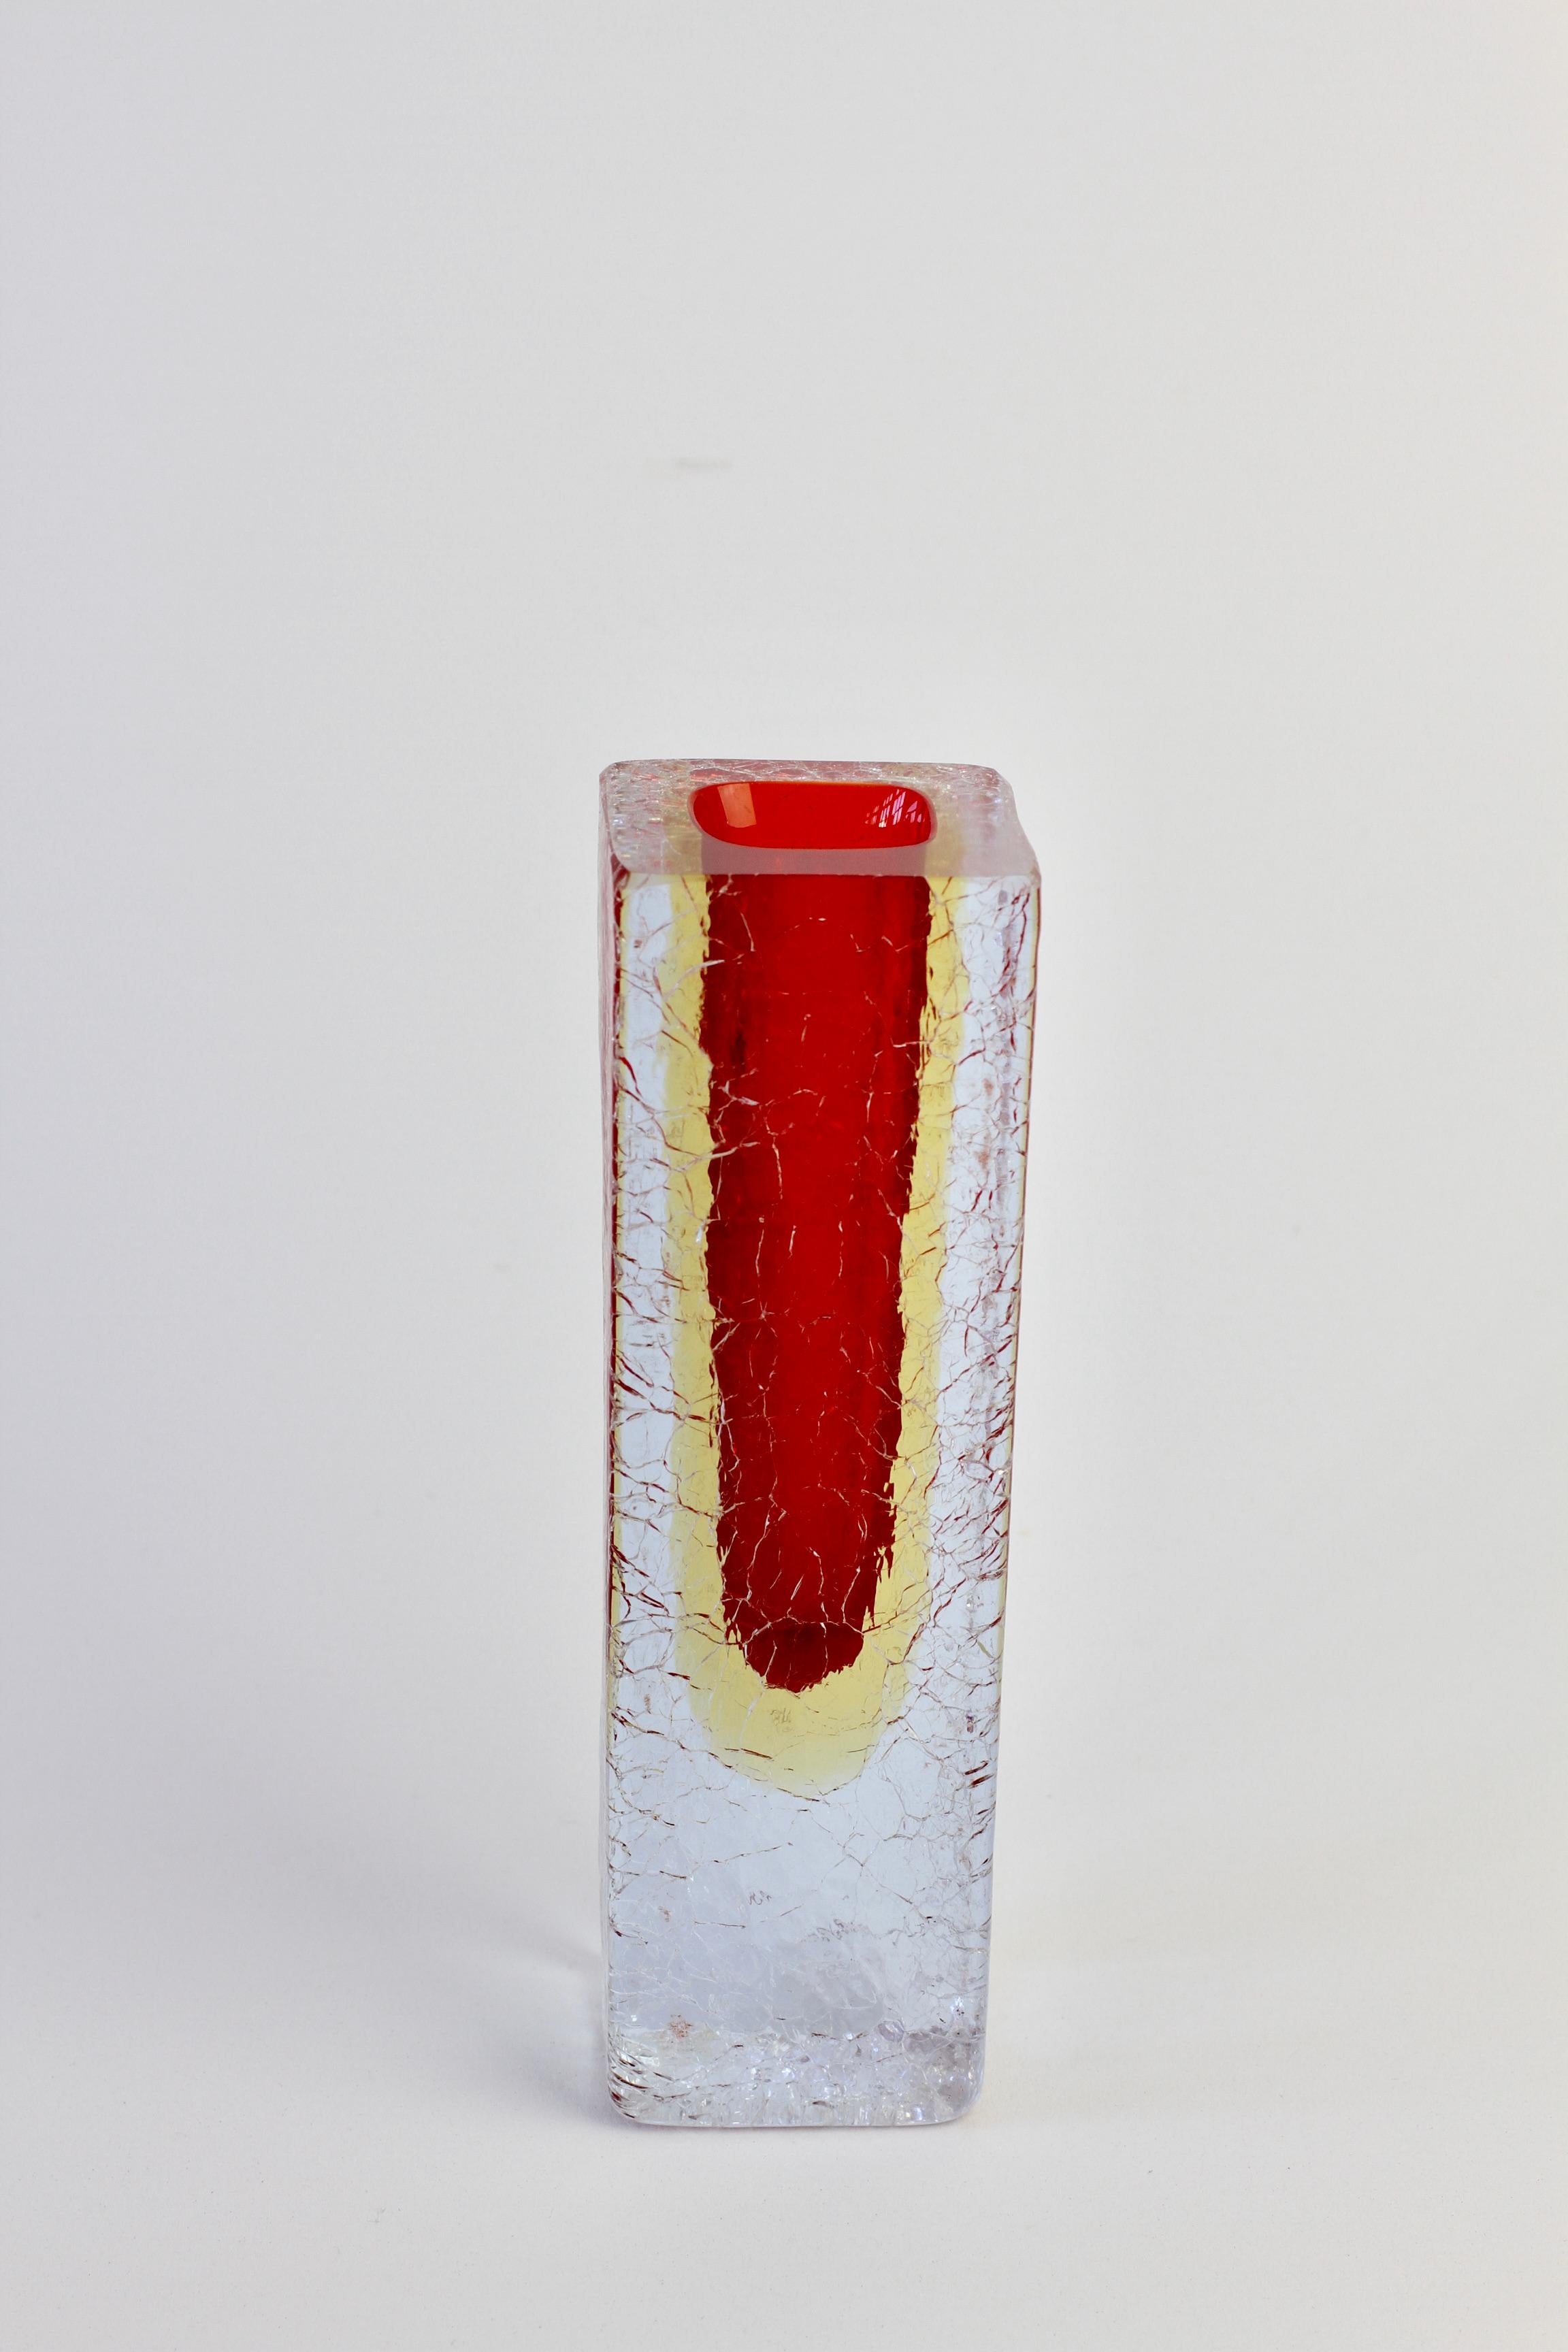 Faceted Red & Yellow Italian Murano 'Sommerso' Crackle Glass Vase, circa 1960s For Sale 2